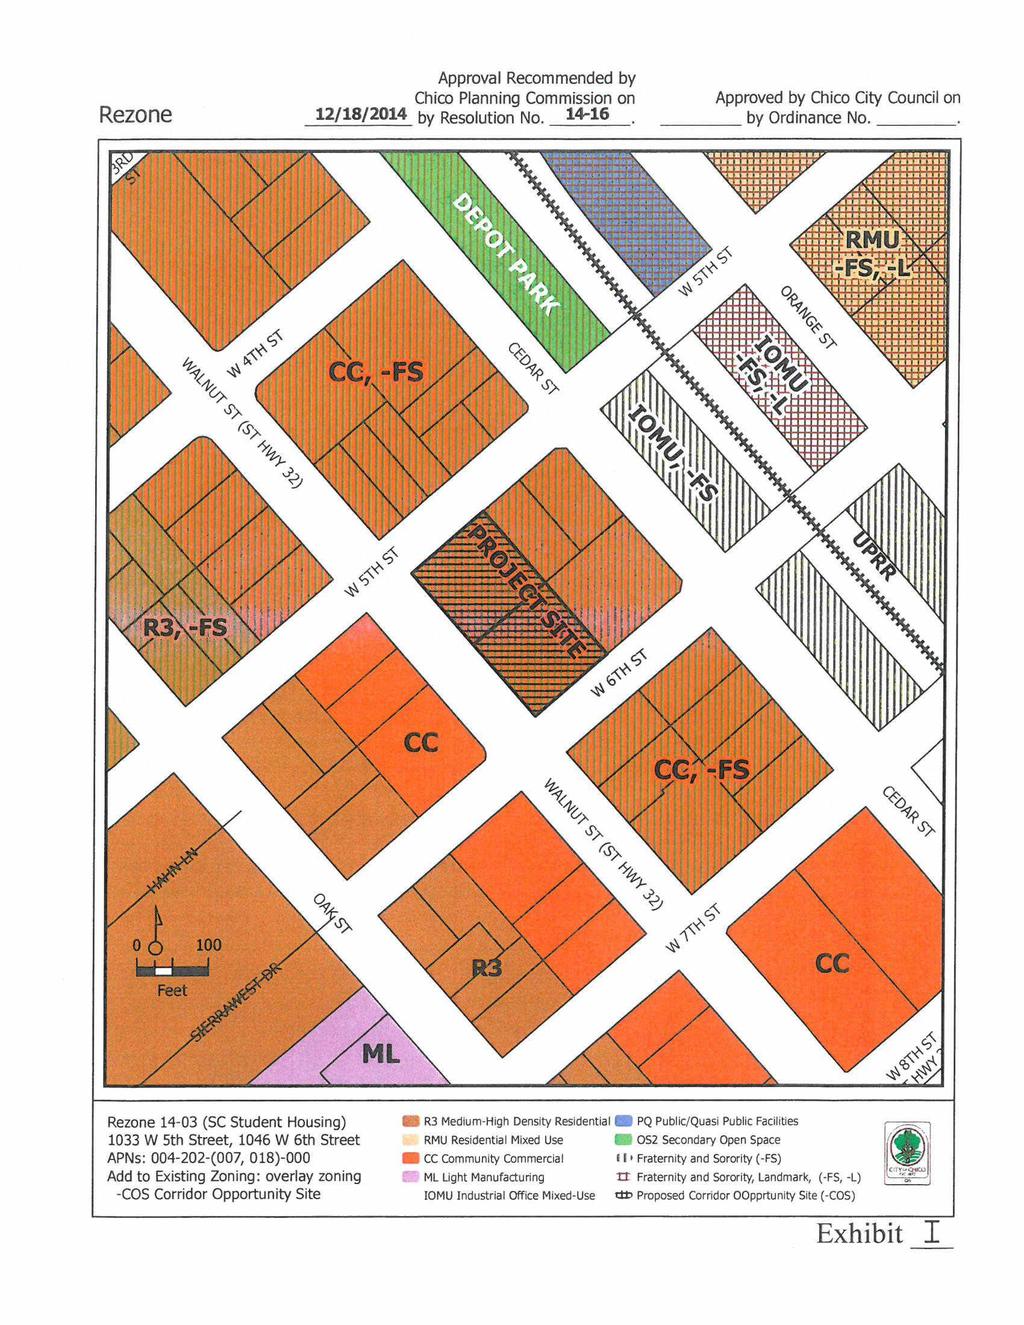 Rezone Approval Recommended by Chico Planning Commission on 12/18/201 by Resolution No. 1-16 Approved by Chico City Council on by Ordinance No. Nltillitlitill;v A#=.,1,!.il CC, -FS, R3, -FS 5 1.:, ':.